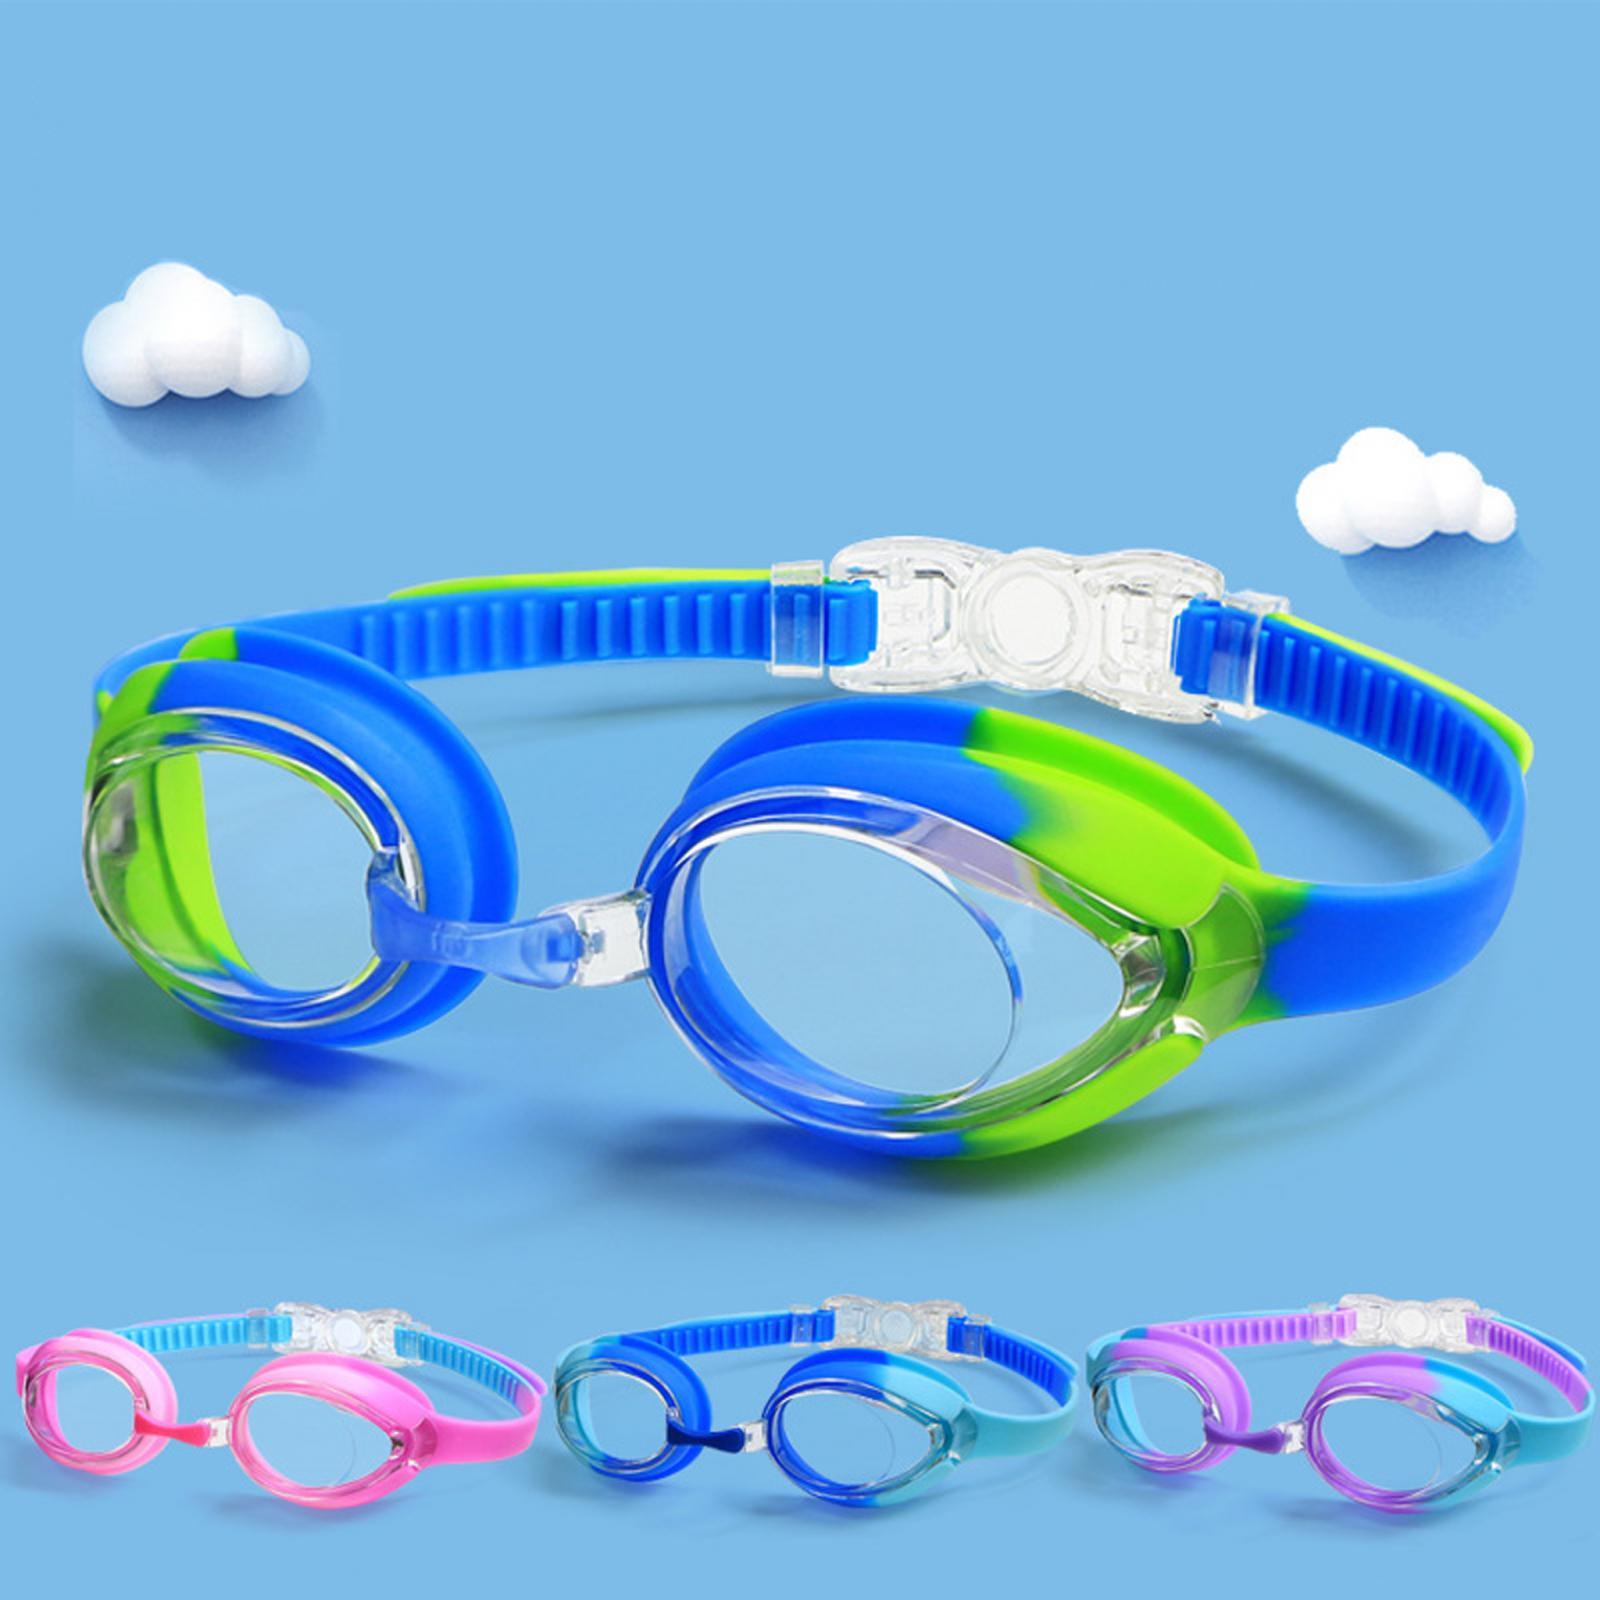 Swimming Goggles Comfortable No Leaking Clear Vision Boys Girls Swim Goggles Clear and Navy